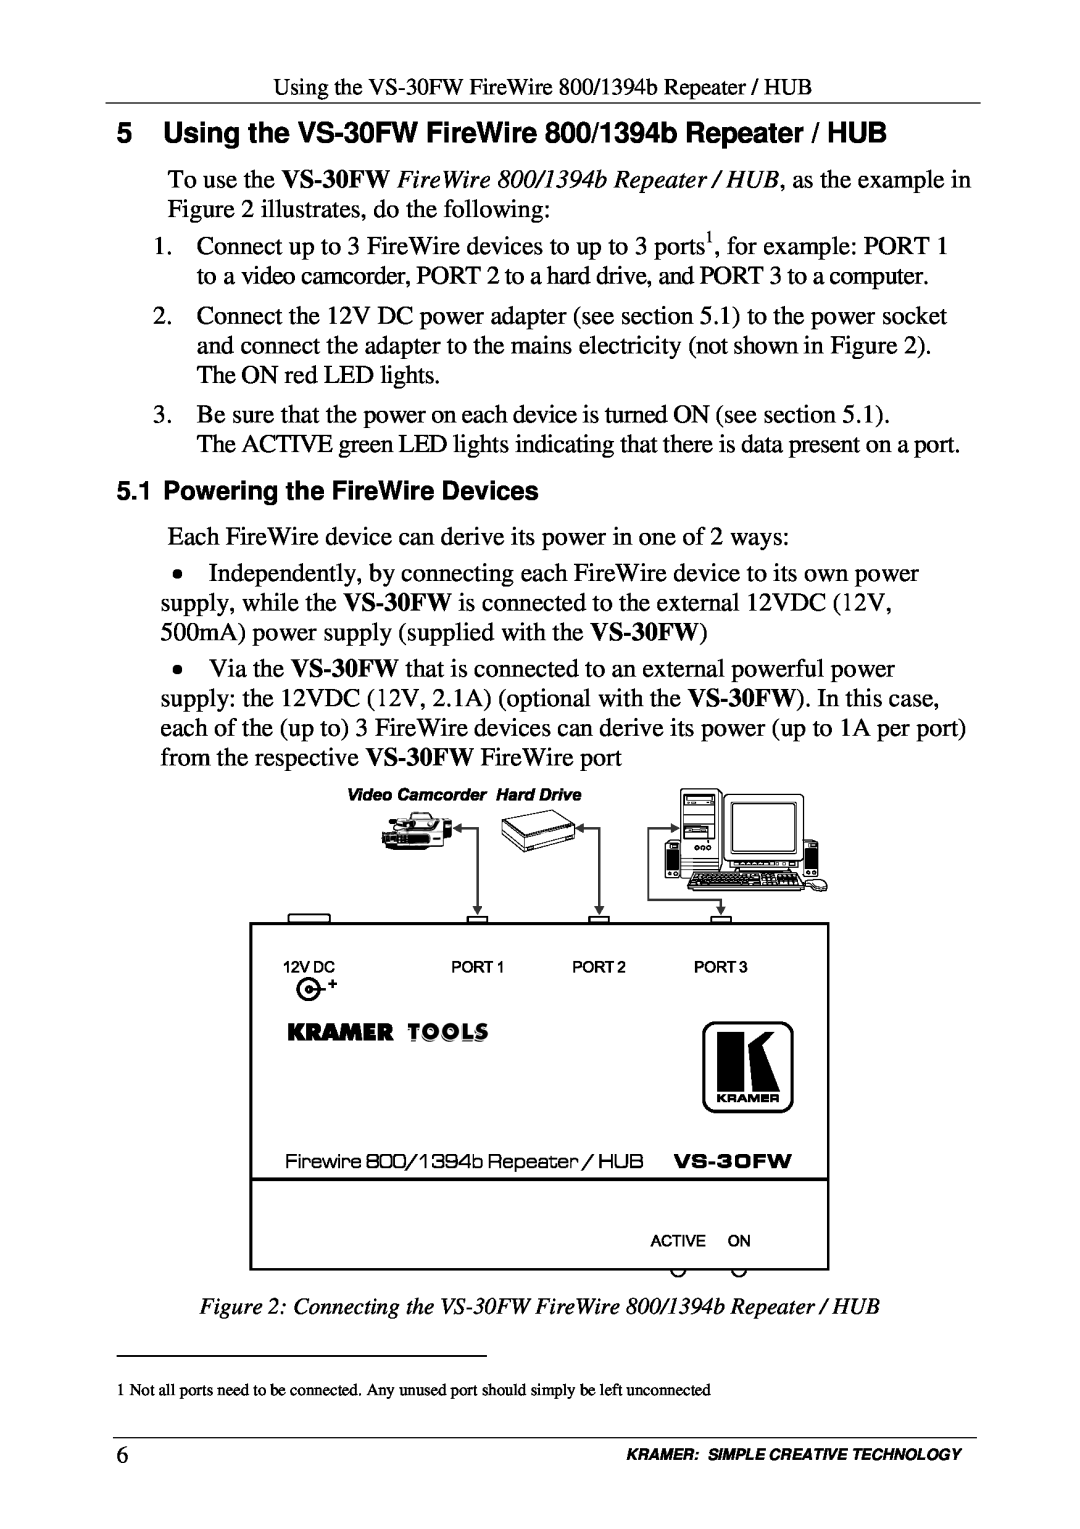 Kramer Electronics user manual Using the VS-30FW FireWire 800/1394b Repeater / HUB, Powering the FireWire Devices 